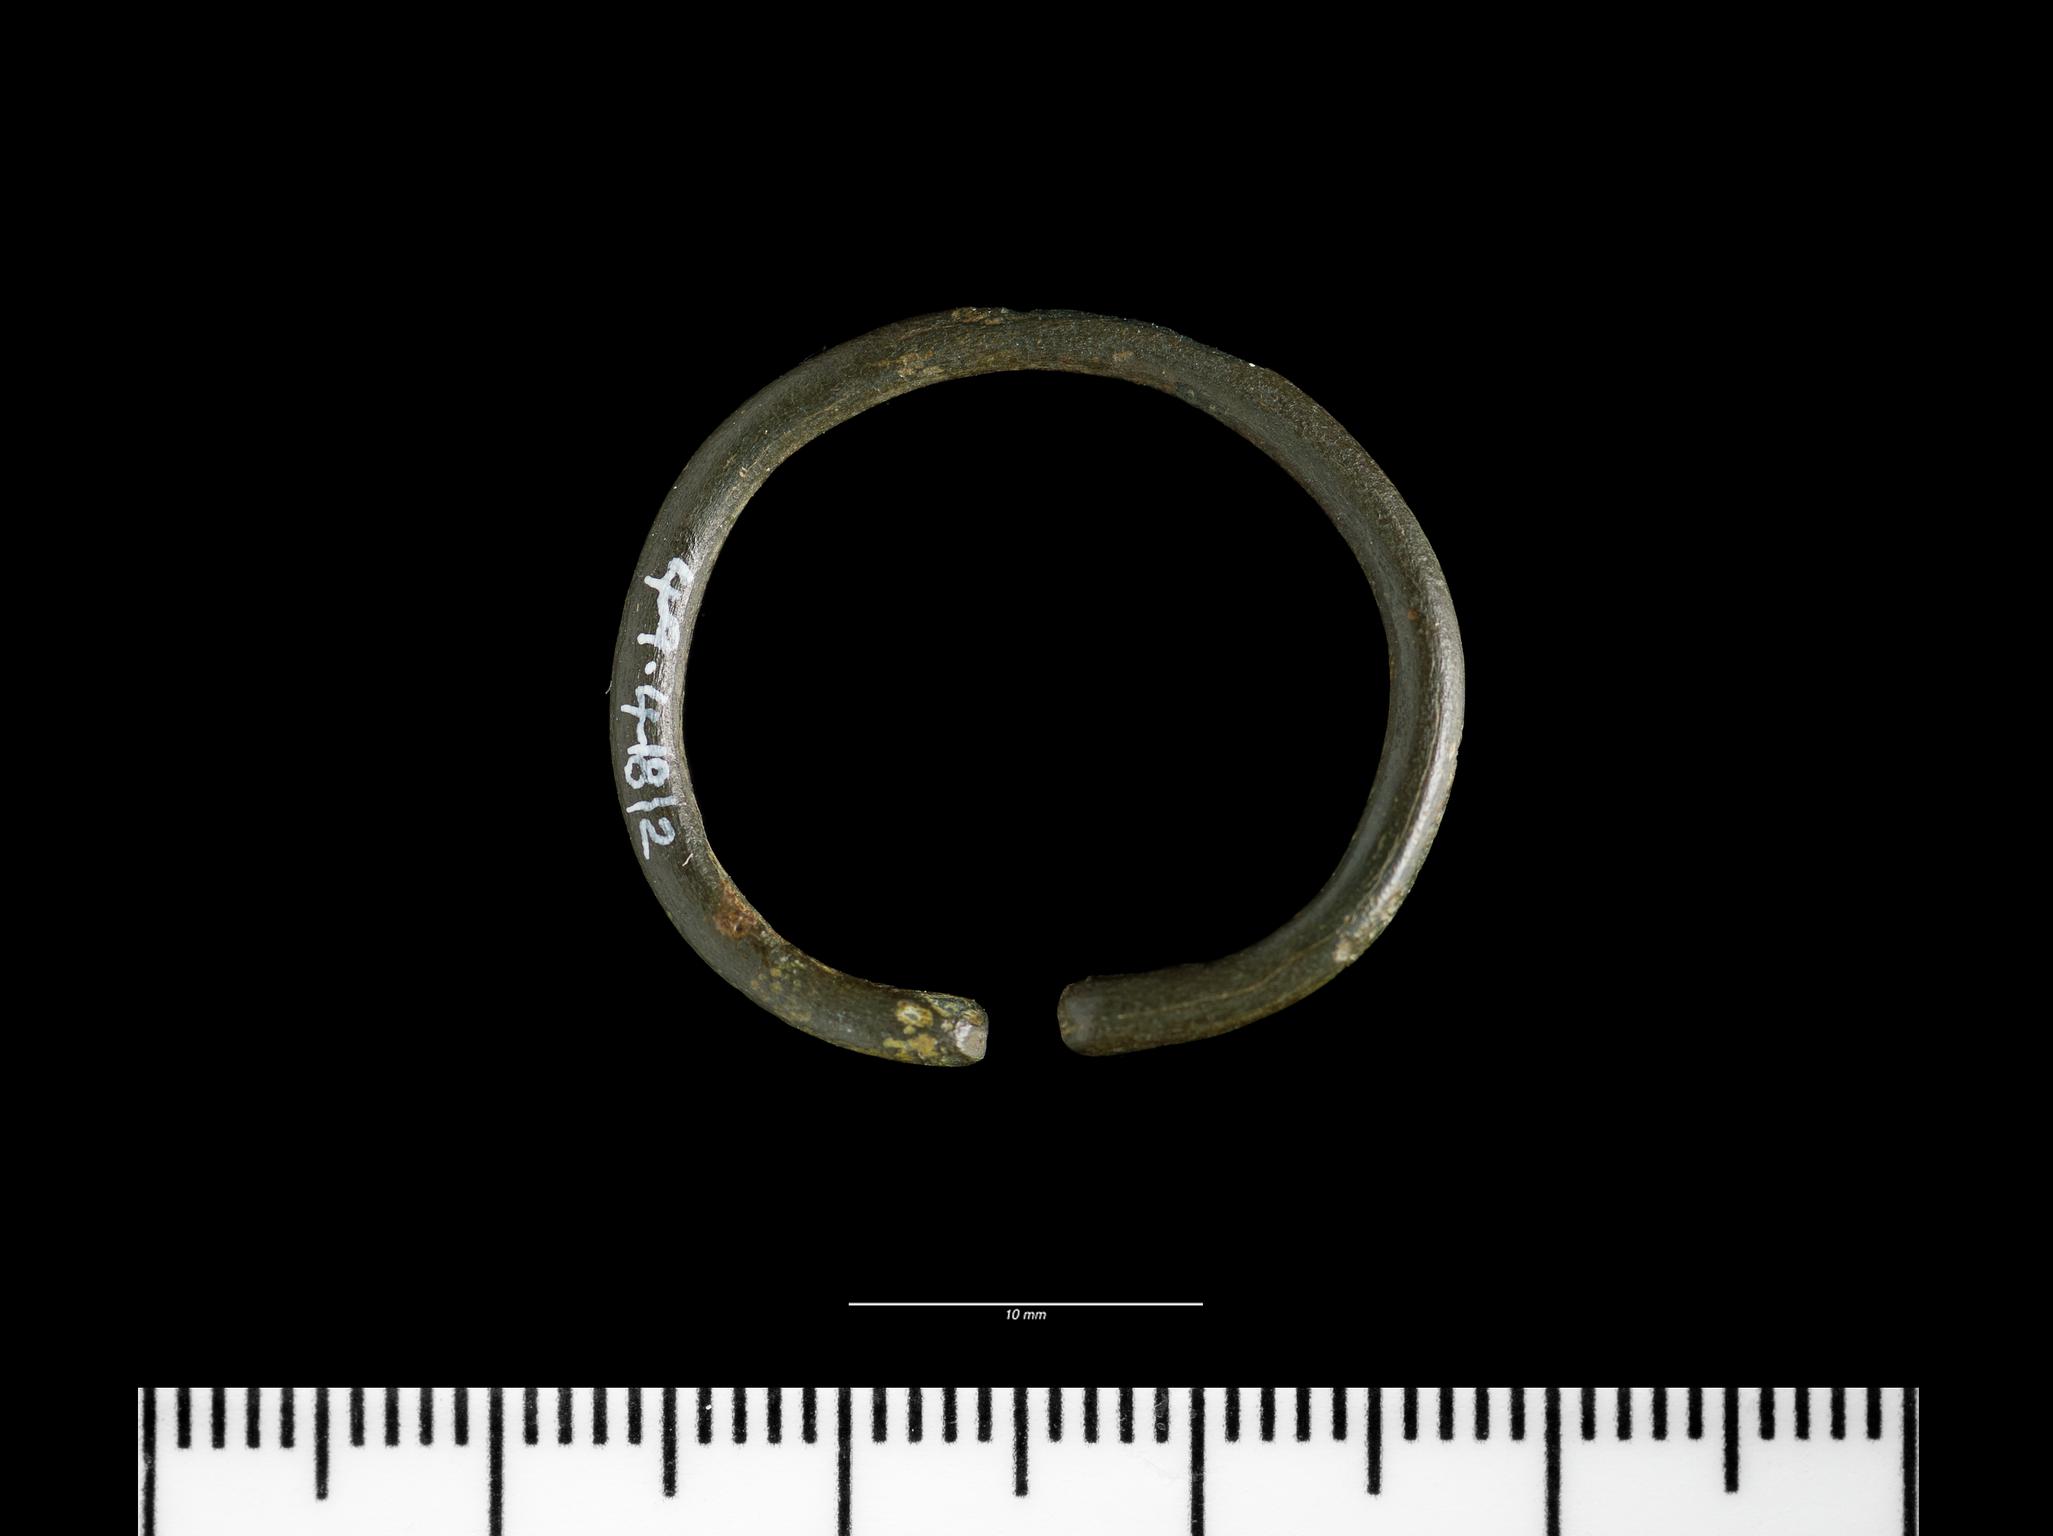 Late Iron Age copper alloy penannular brooch